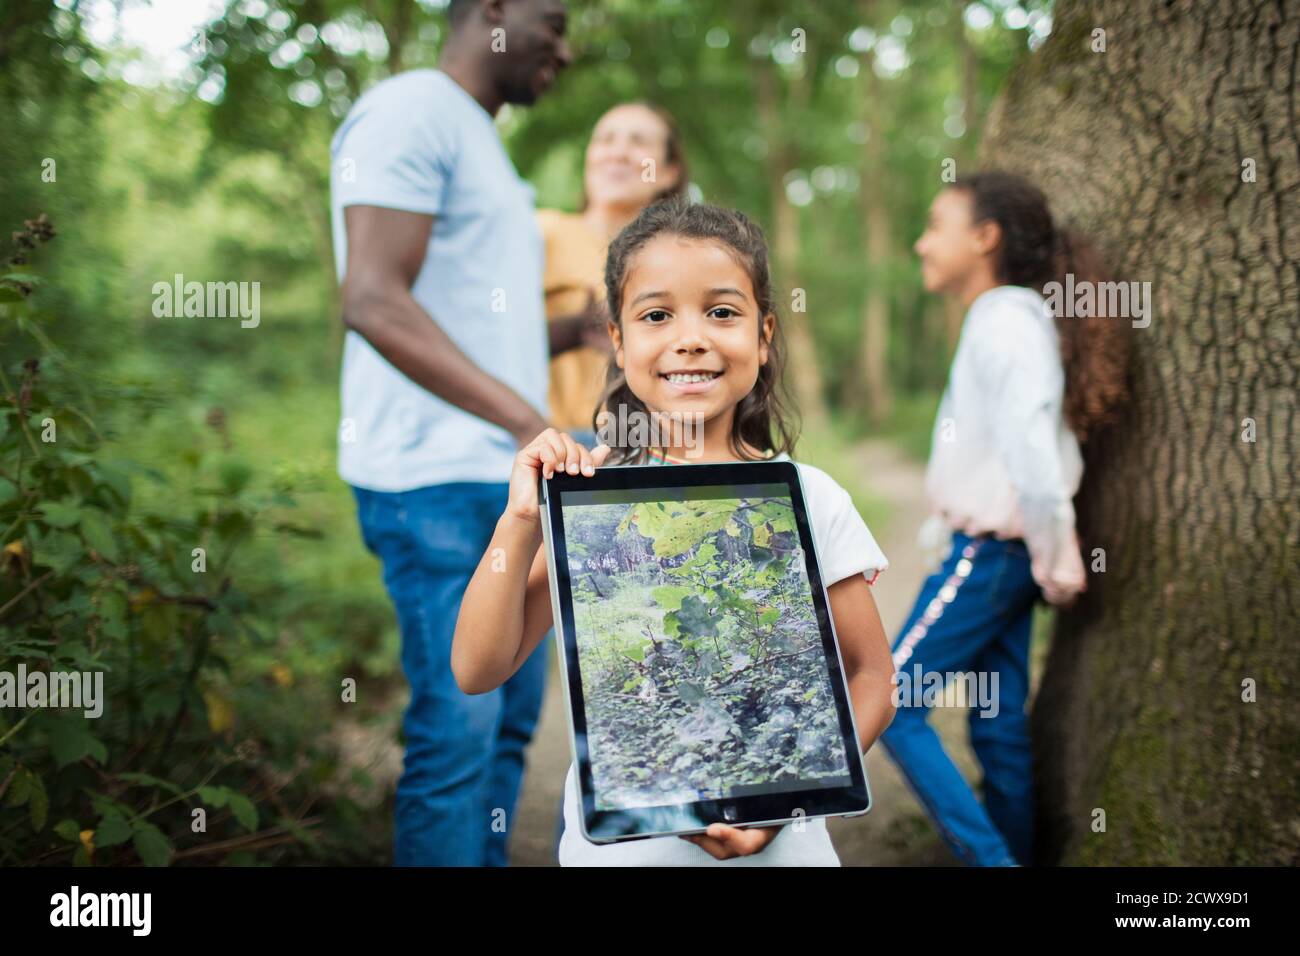 Portrait girl holding digital tablet with photograph of plant in woods Stock Photo